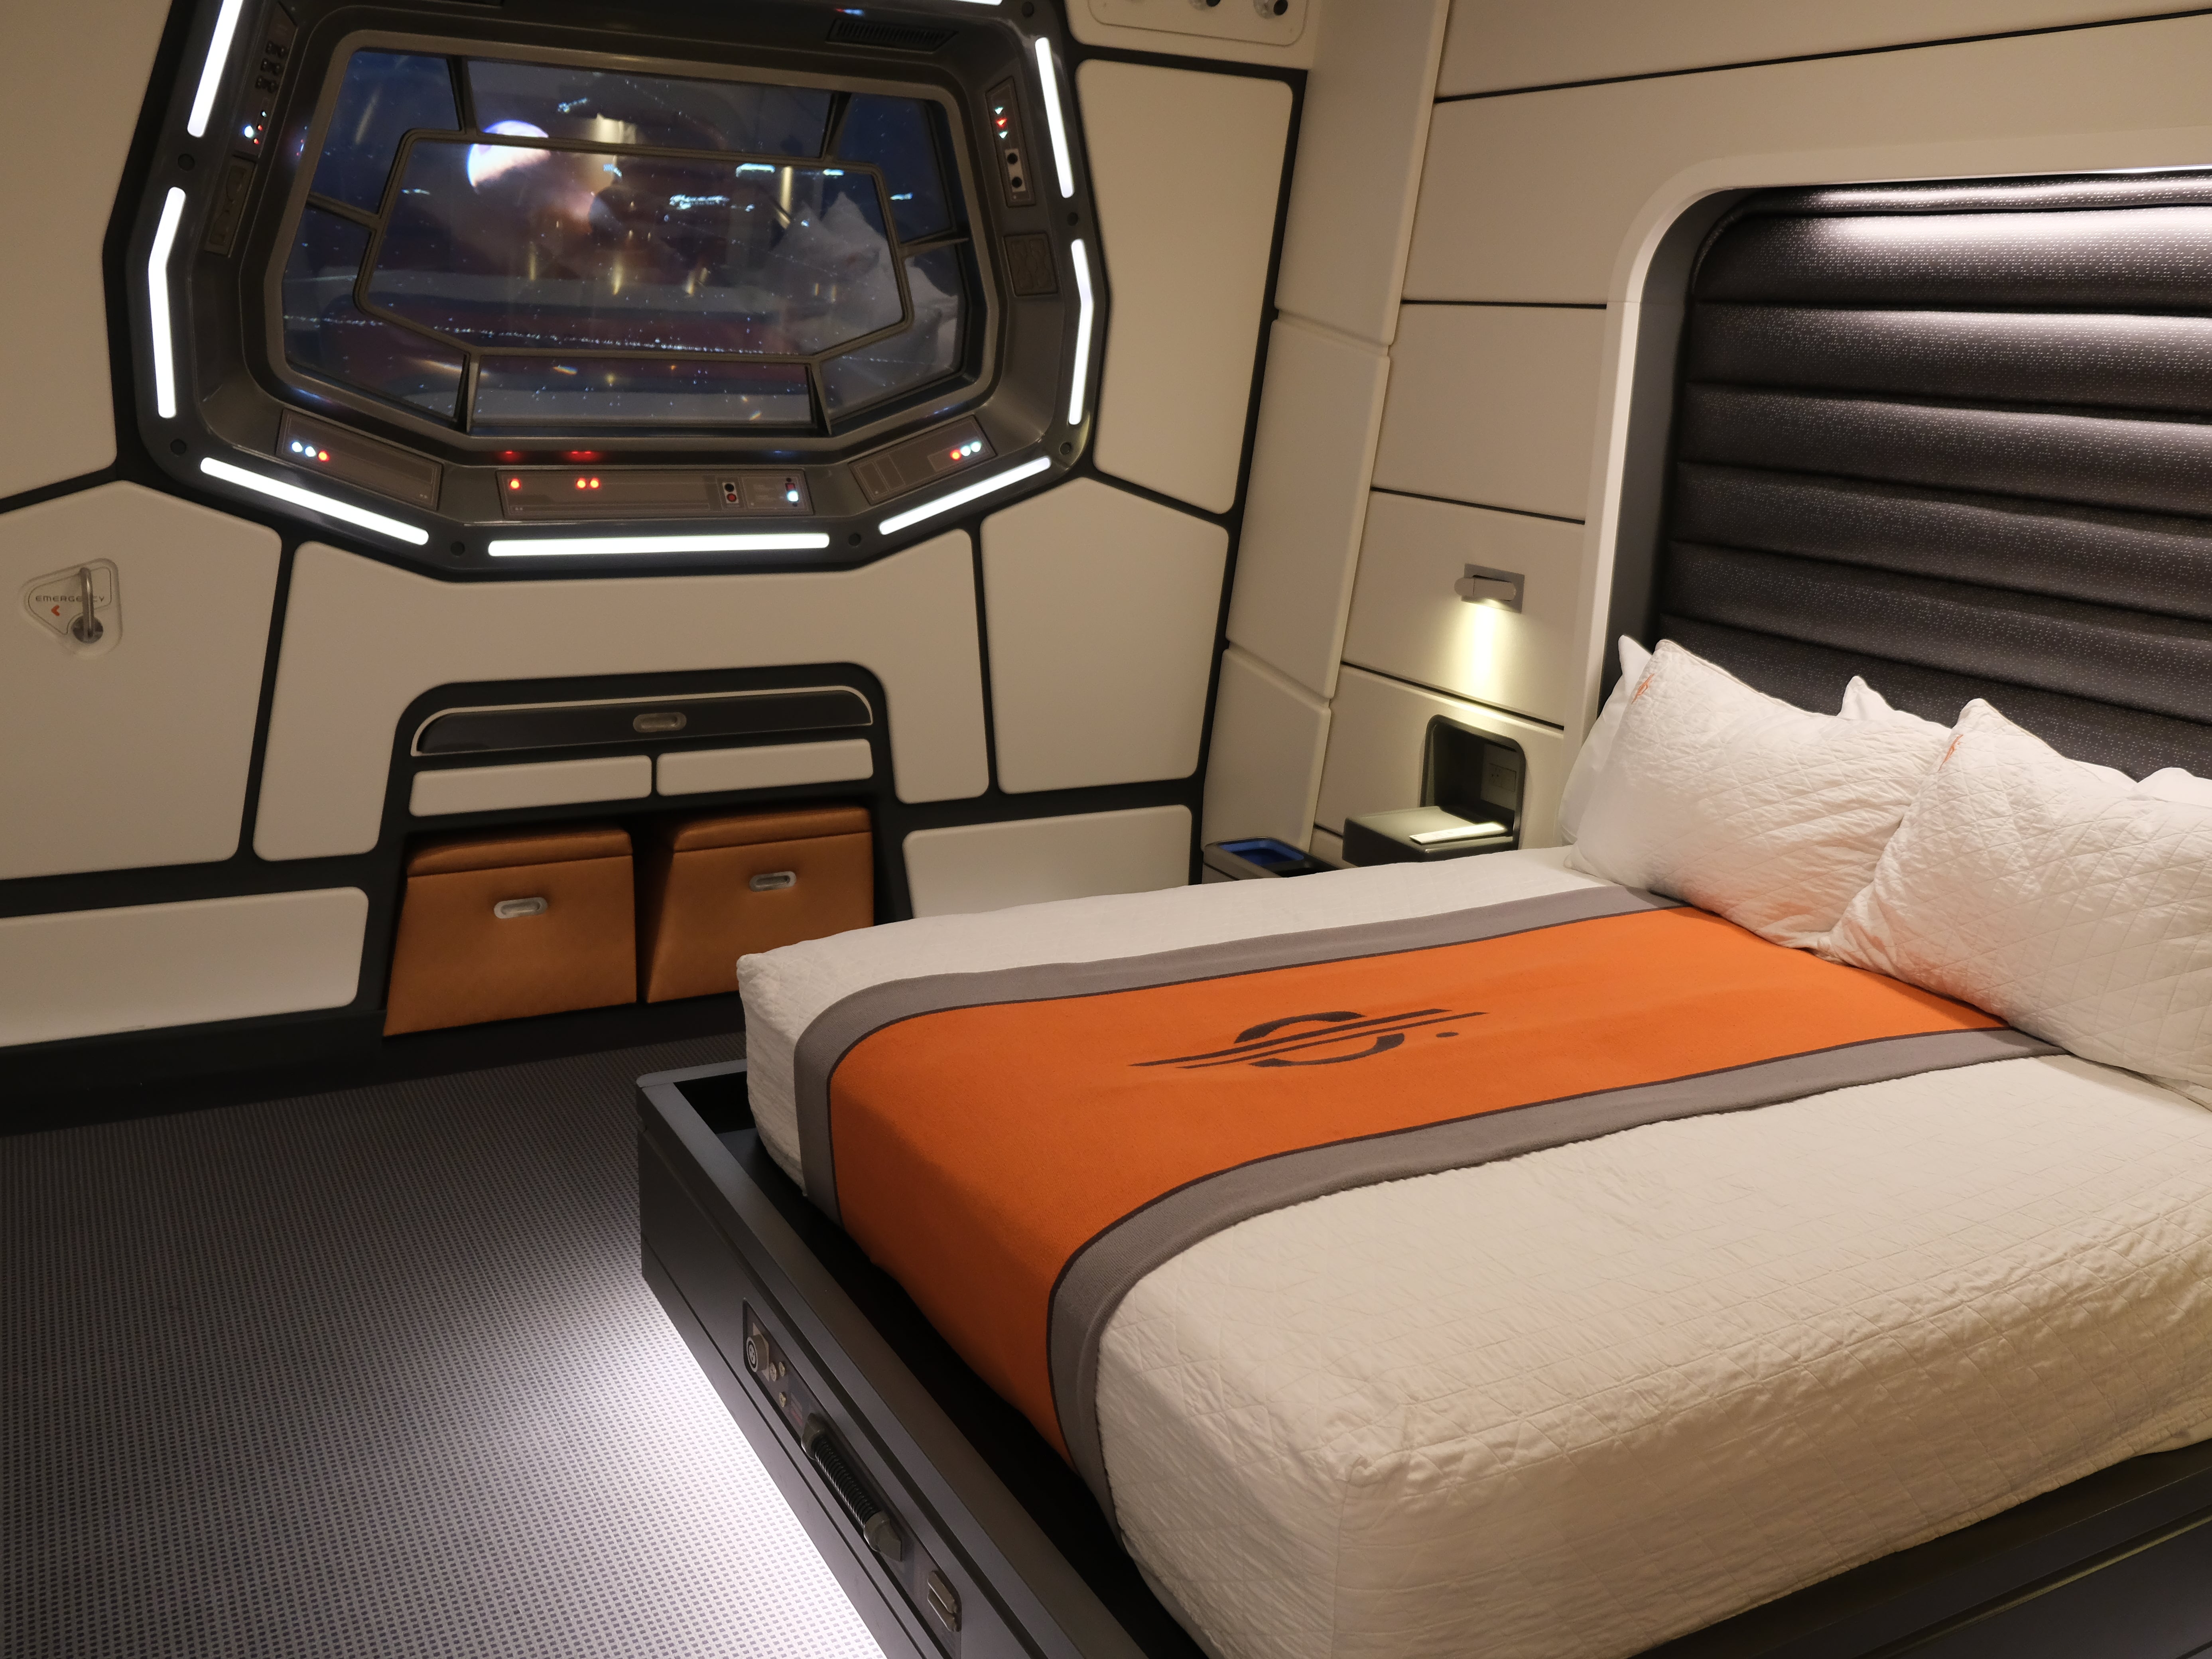 Participants sleep in ‘cabins’ aboard the starcruiser